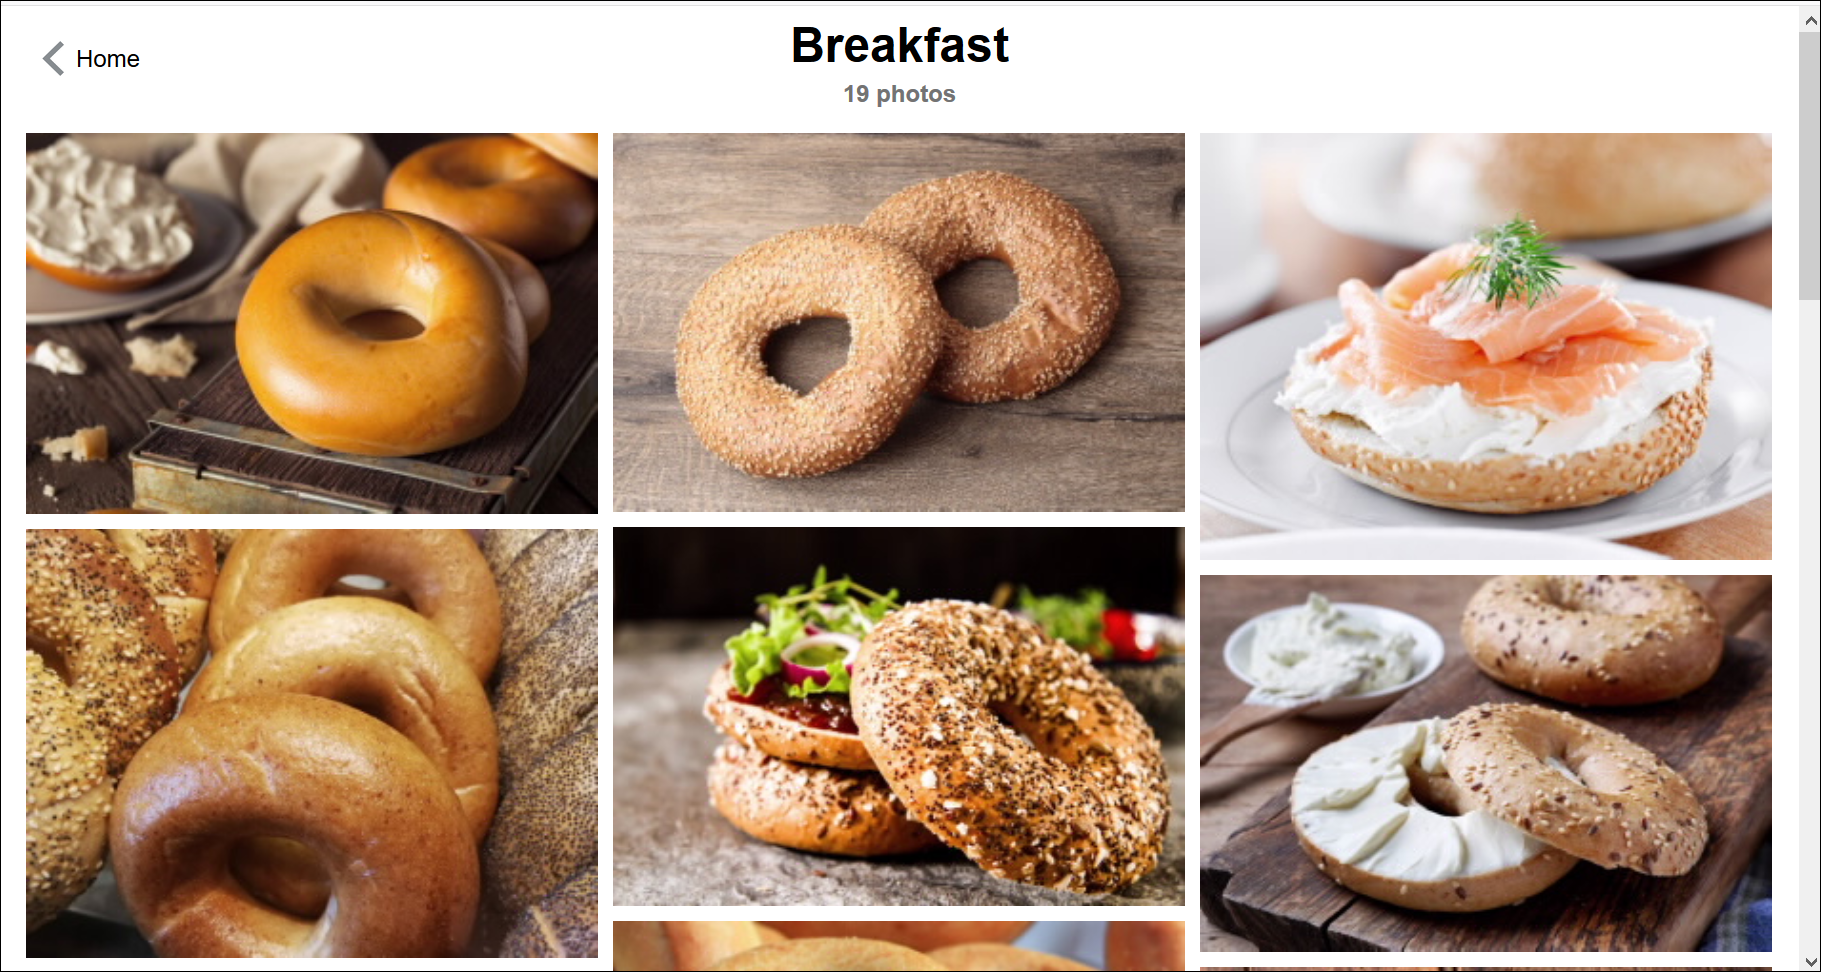 This image shows an image gallery with different kinds of bagels, some with cream or toppings, or both.